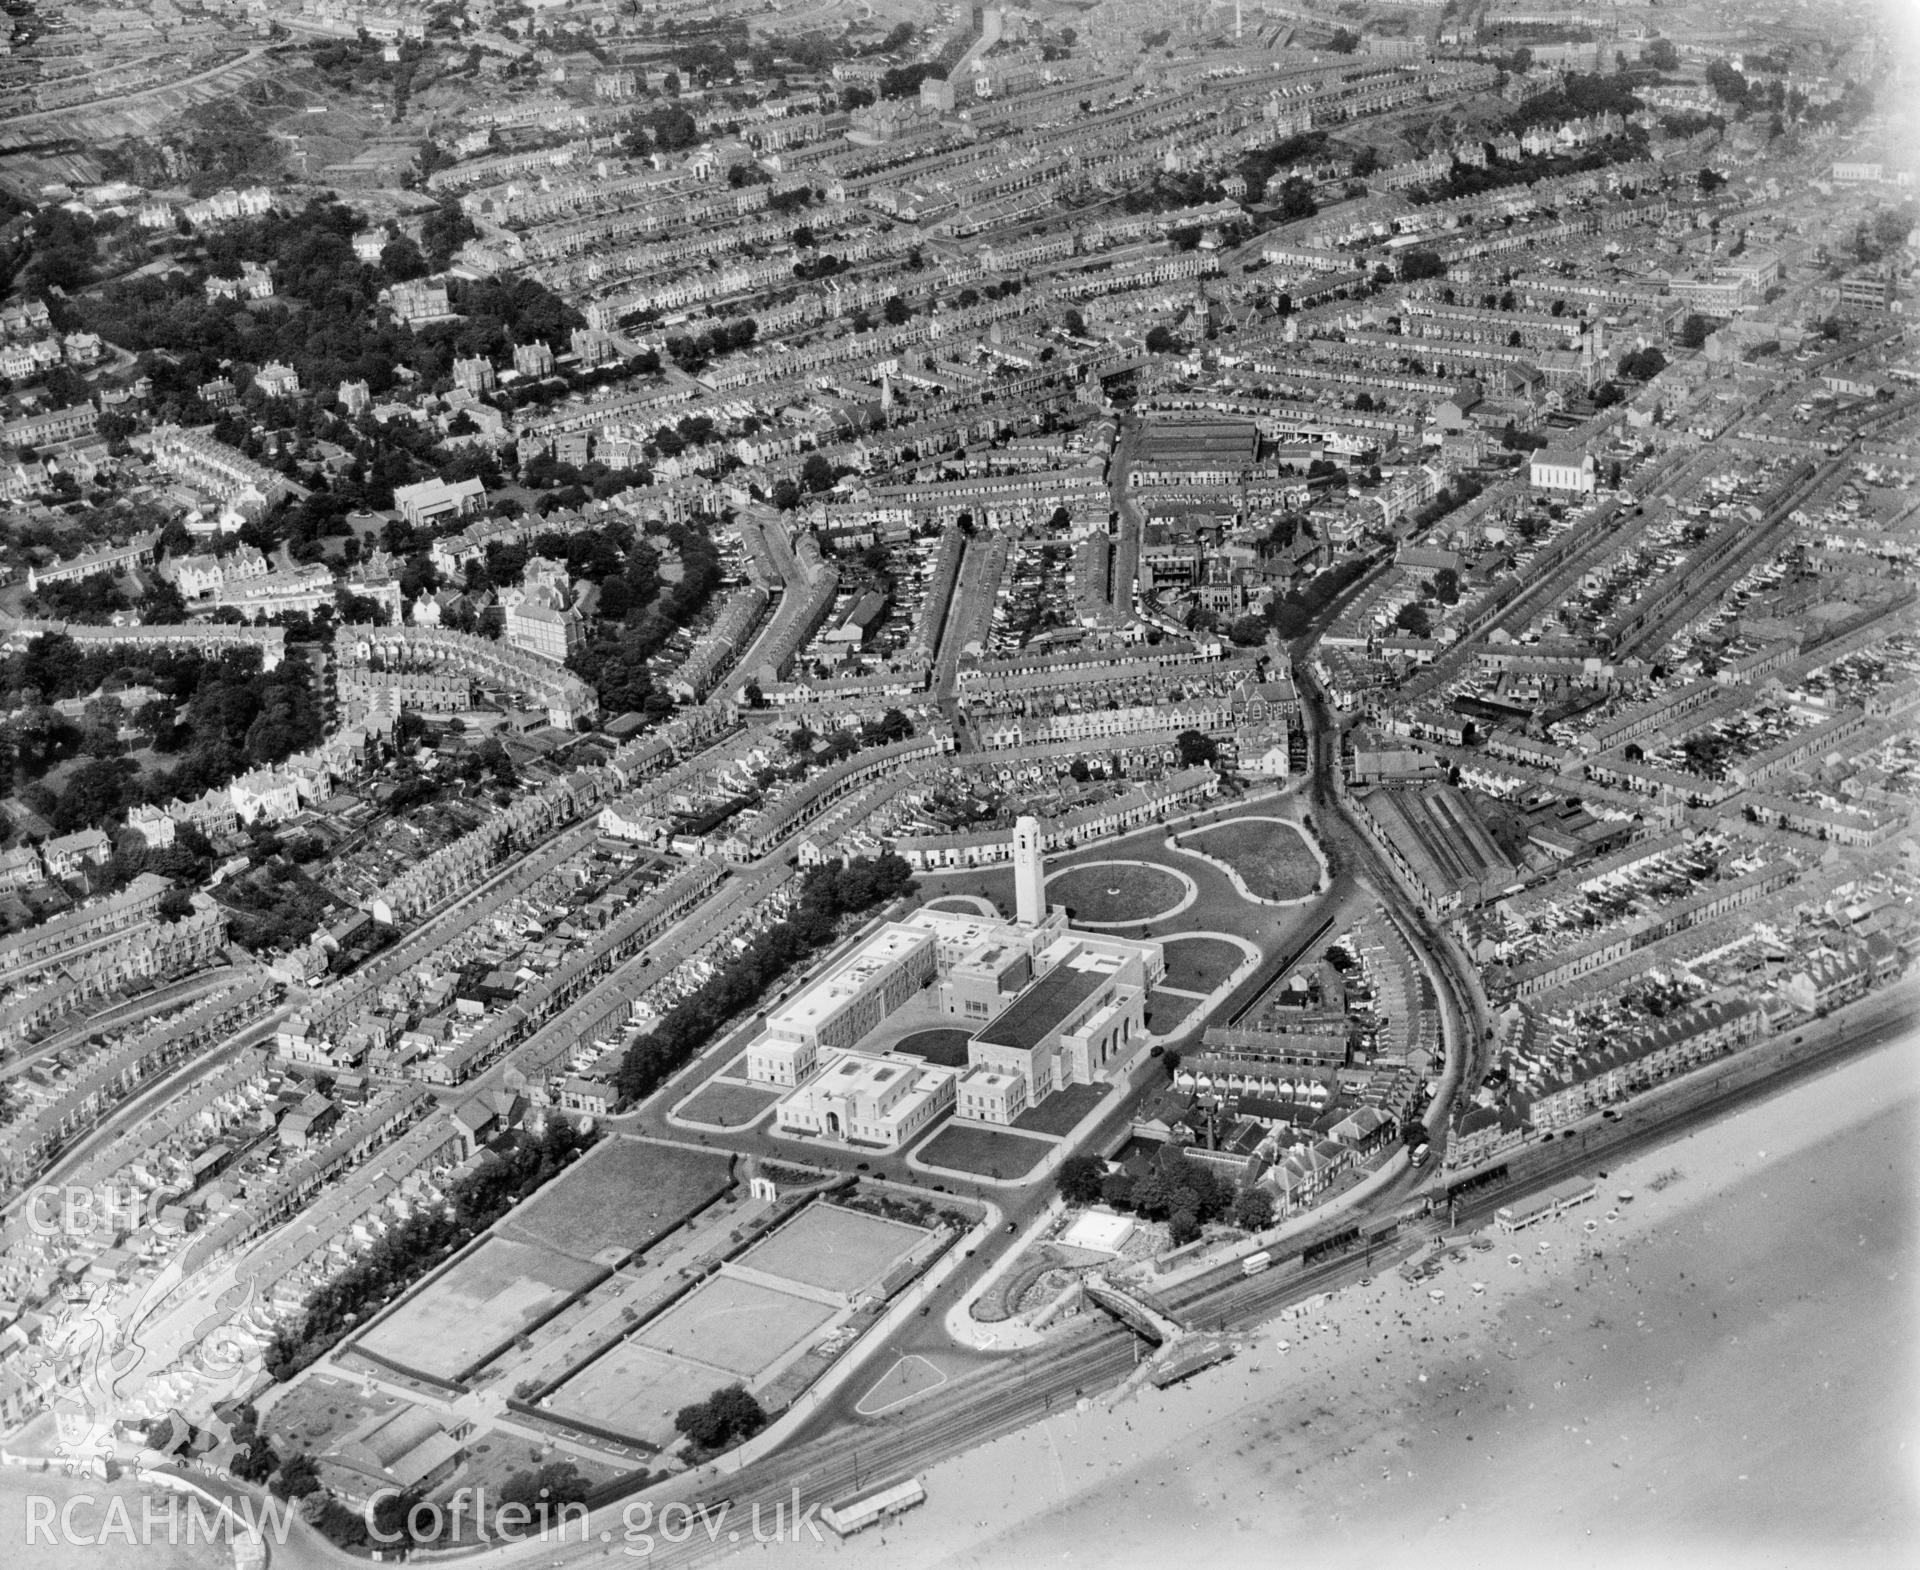 View of central Swansea showing Civic Centre and Victoria Park, oblique aerial view. 5?x4? black and white glass plate negative.